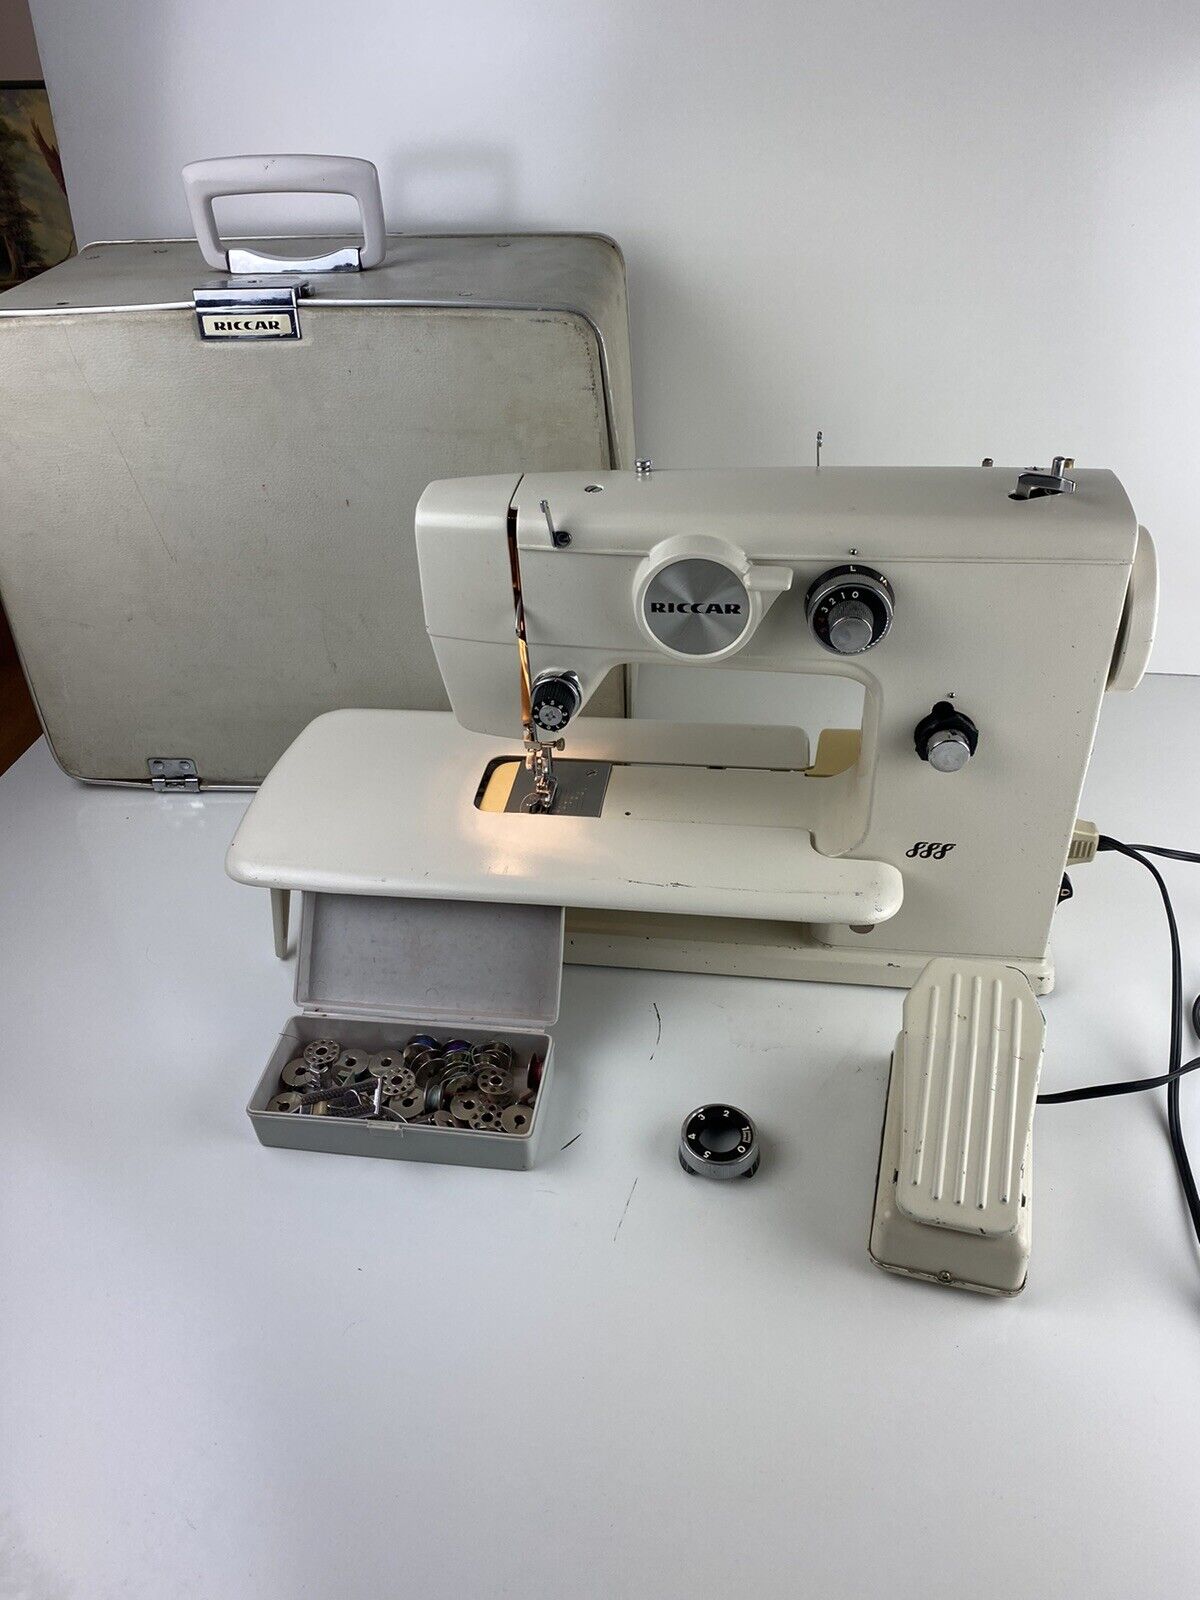 Riccar Model 888 Sewing Machine VTG Tested Works Perfect Missing A Dial But Work